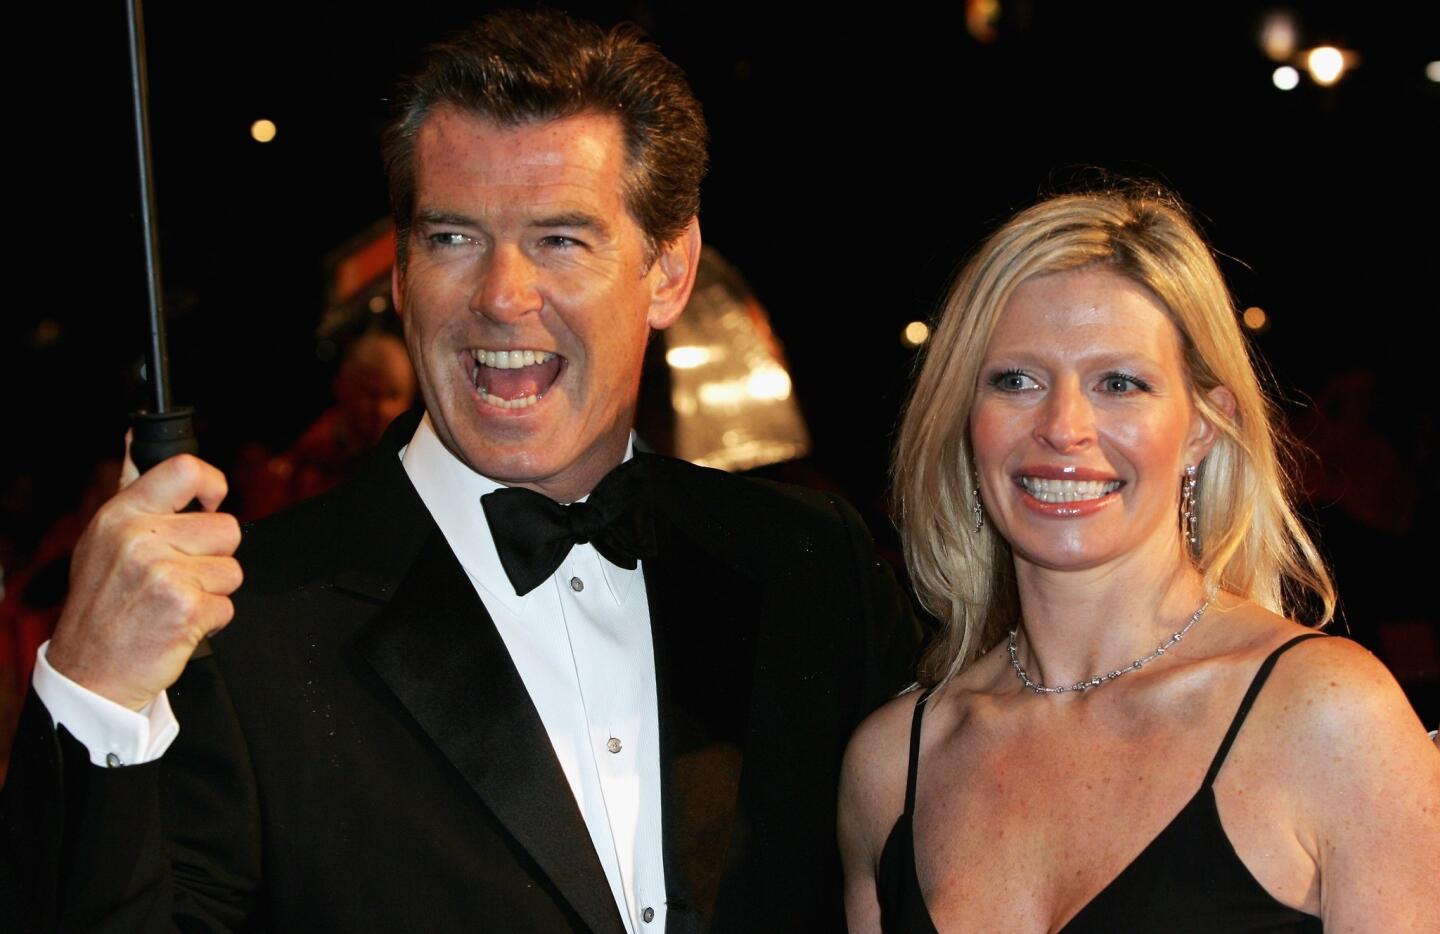 Pierce Brosnan loses daughter Charlotte Brosnan to ovarian cancer